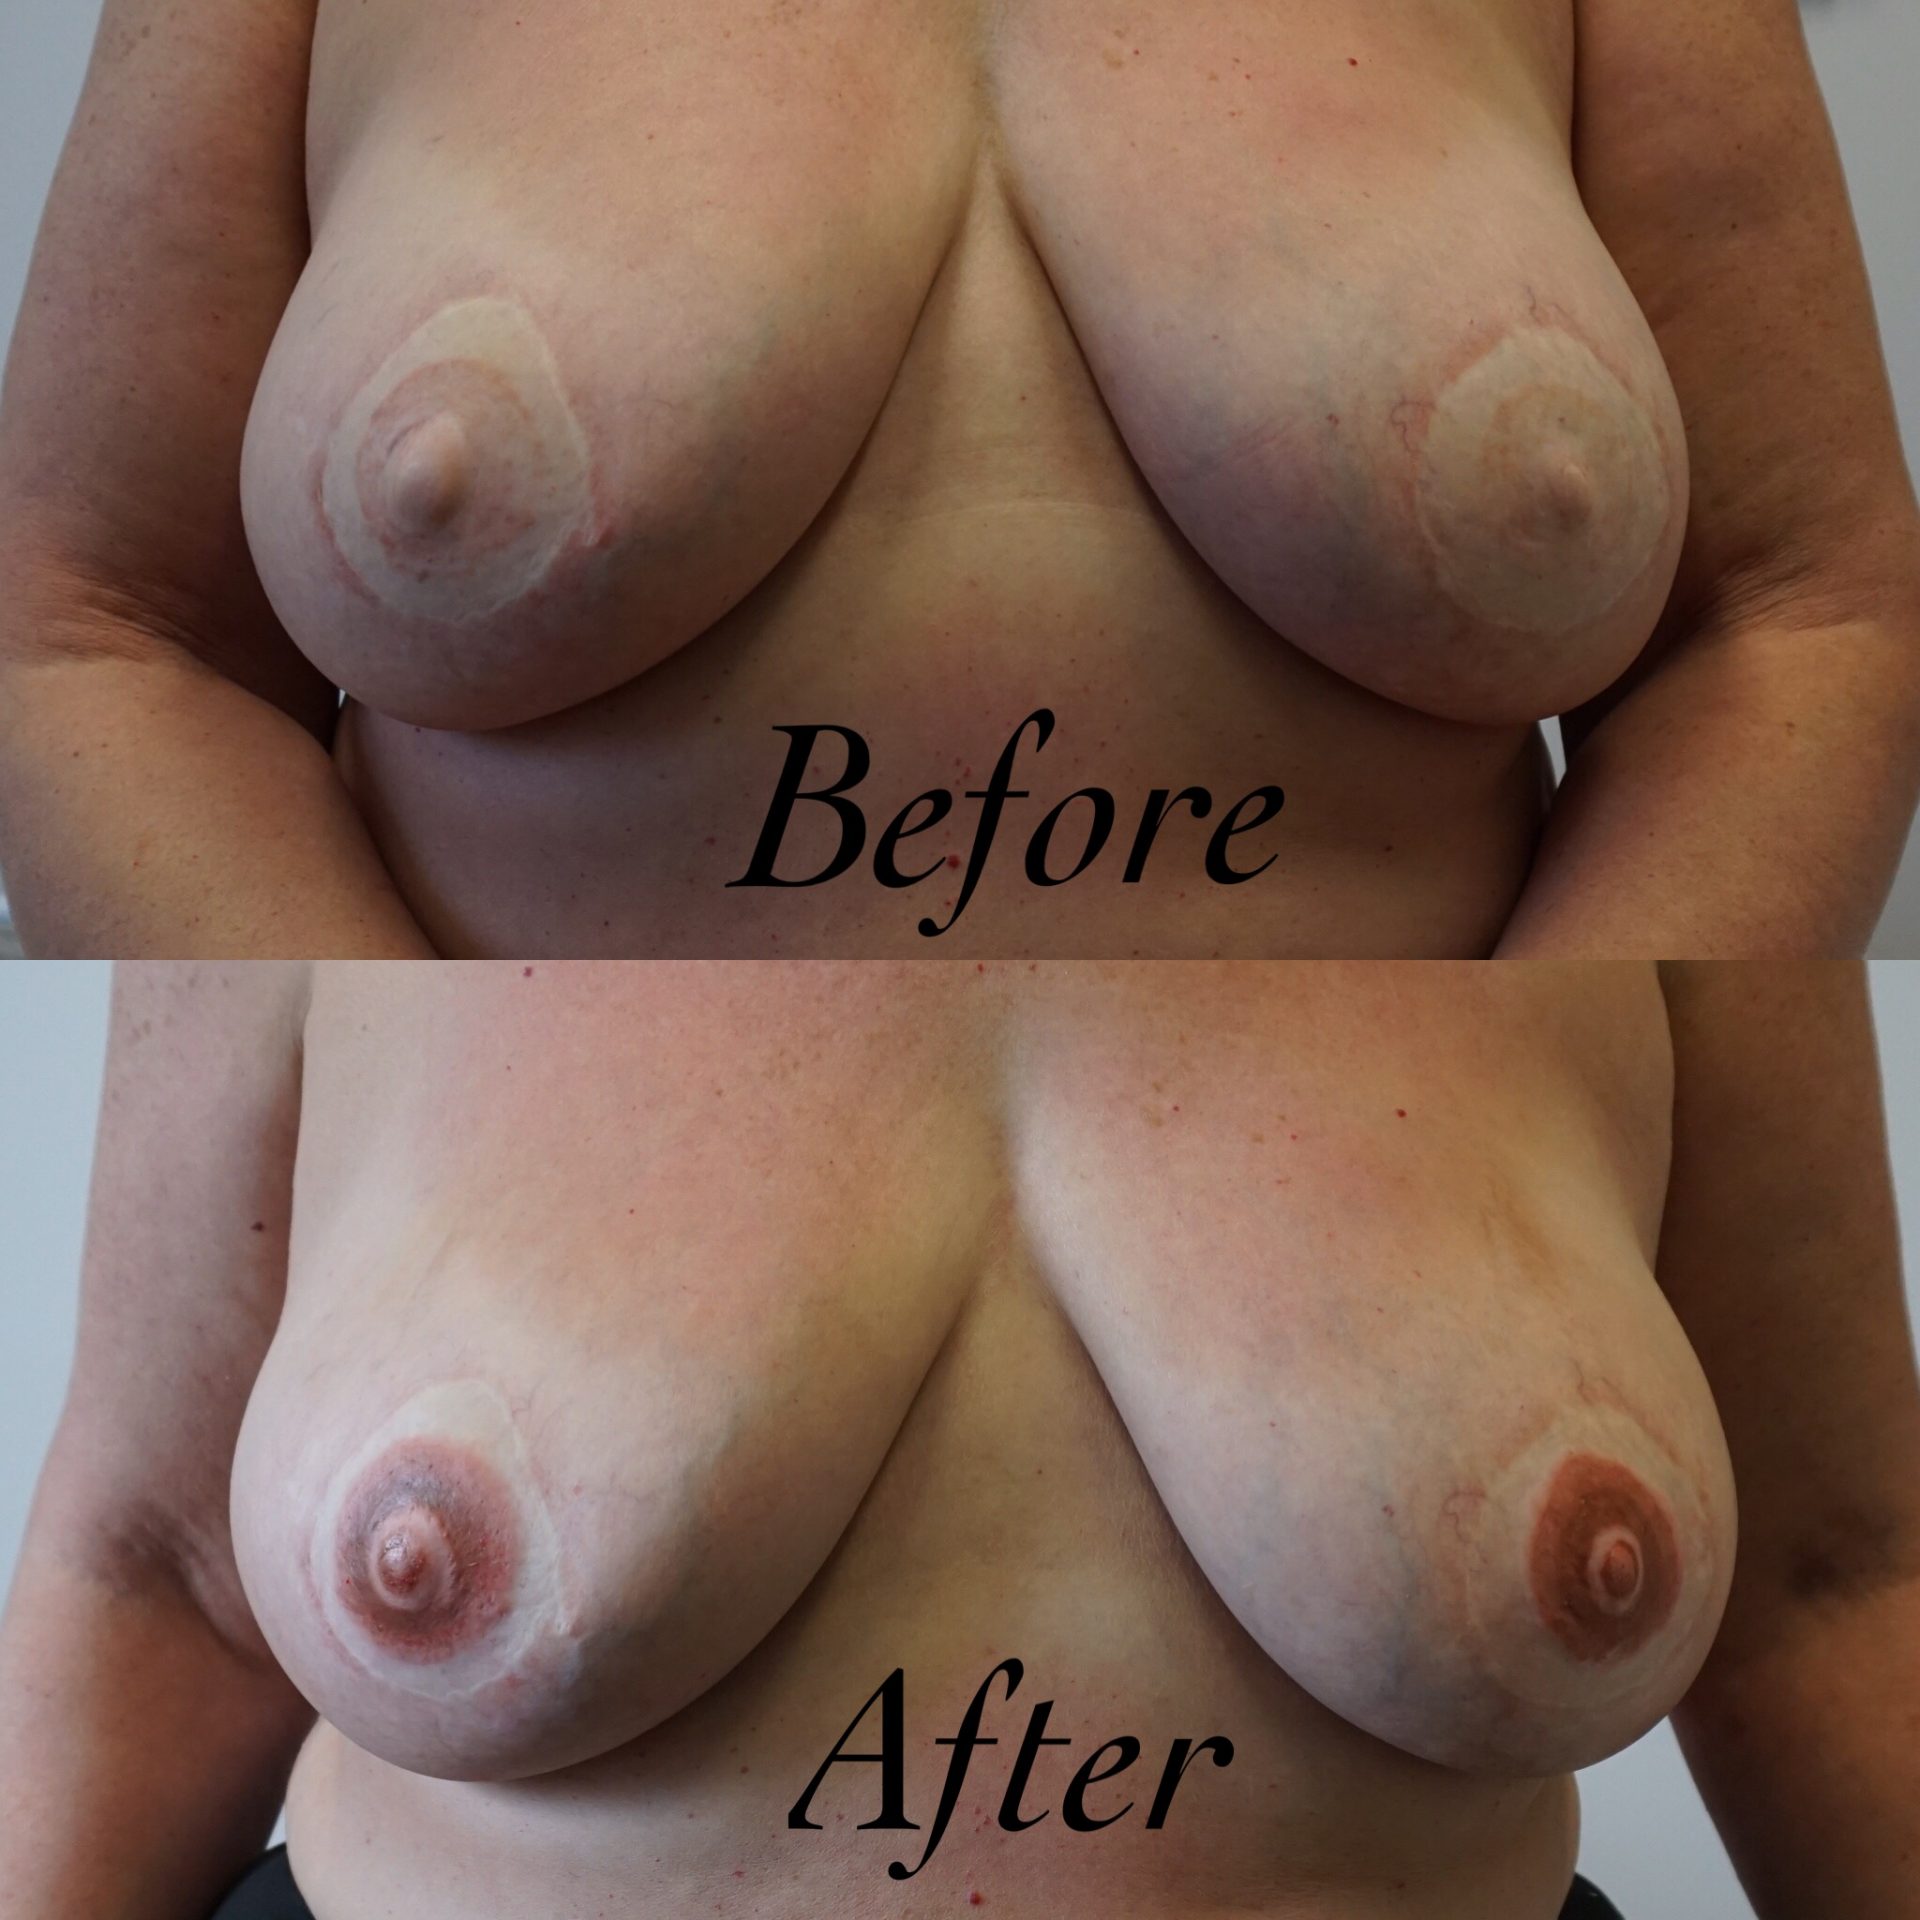 Before & After: Areola re-pigmentation